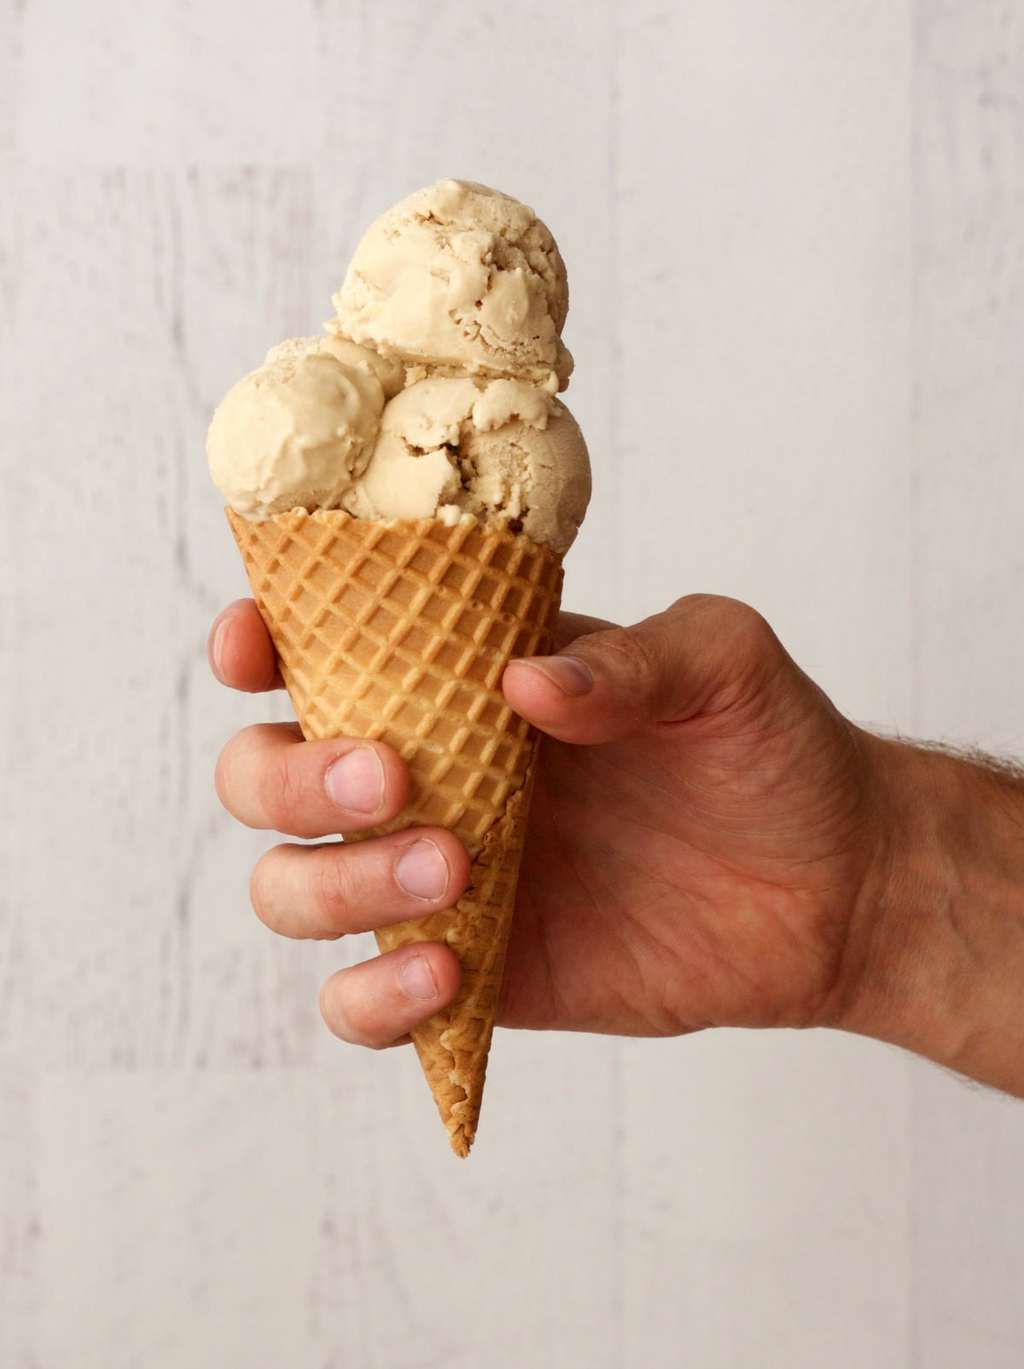 Salted caramel ice cream scoops in an ice cream cone. 